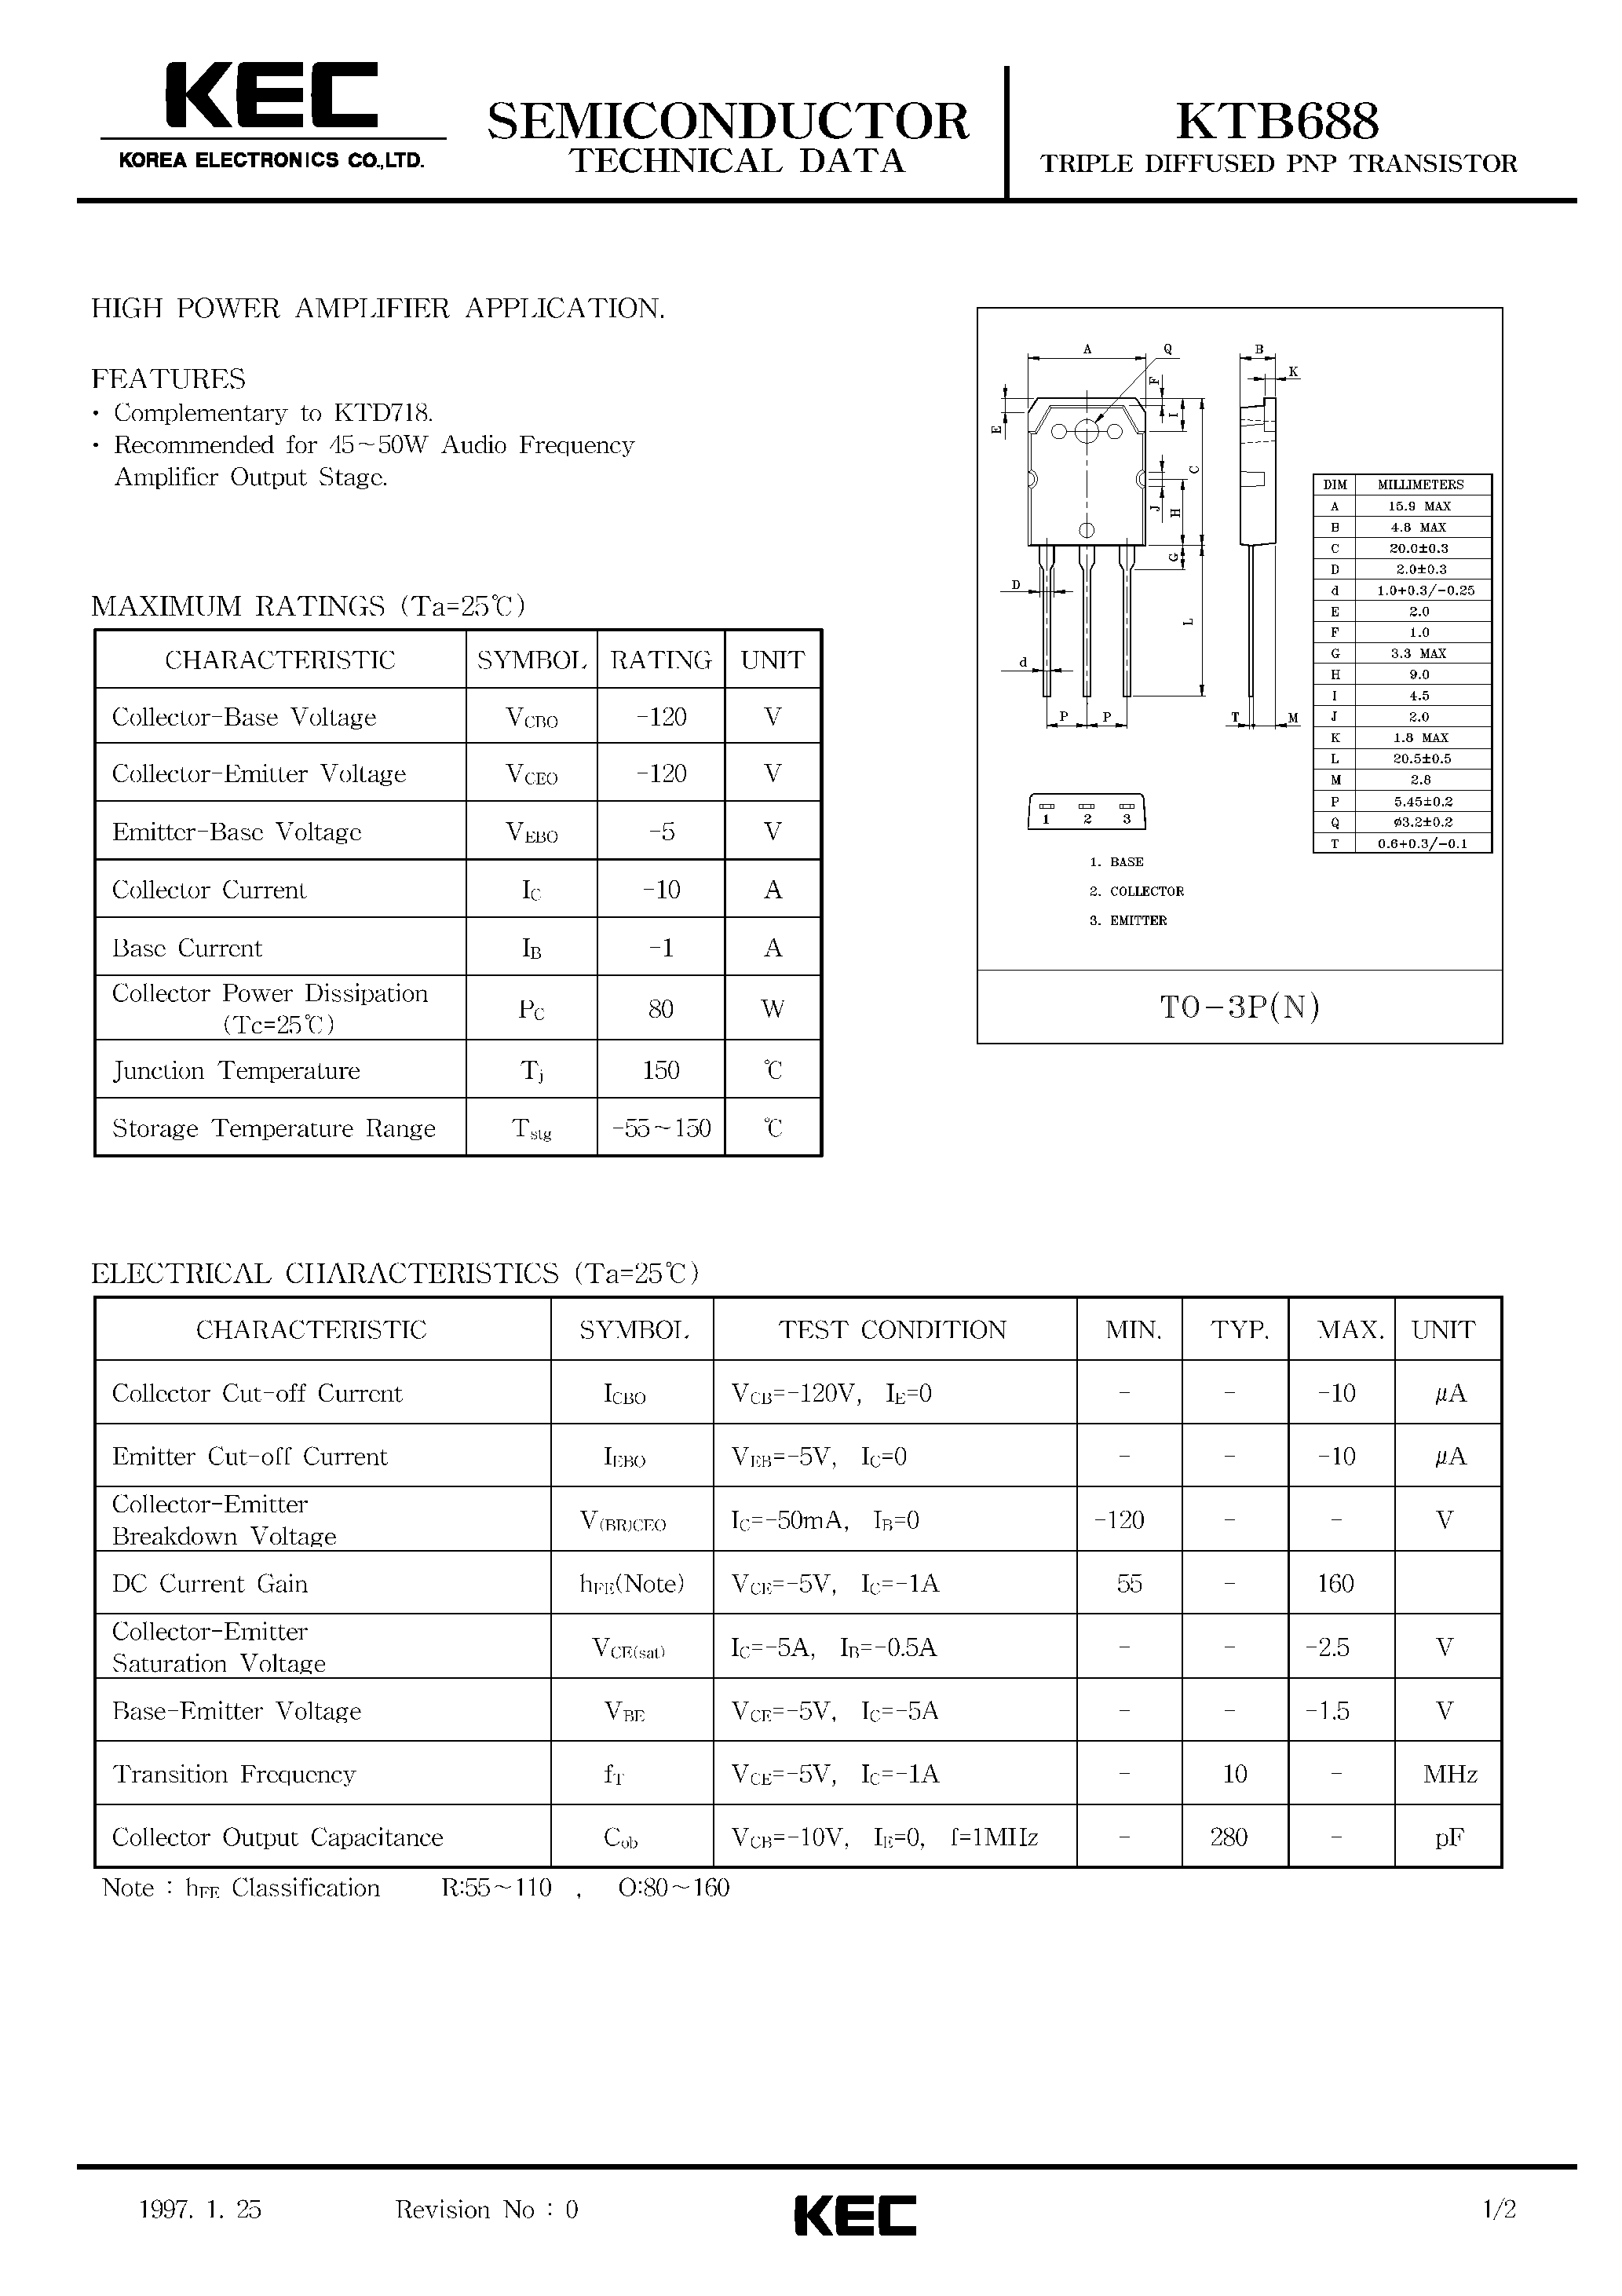 Datasheet KTB688 - TRIPLE DIFFUSED PNP TRANSISTOR(HIGH POWER AMPLIFIER) page 1